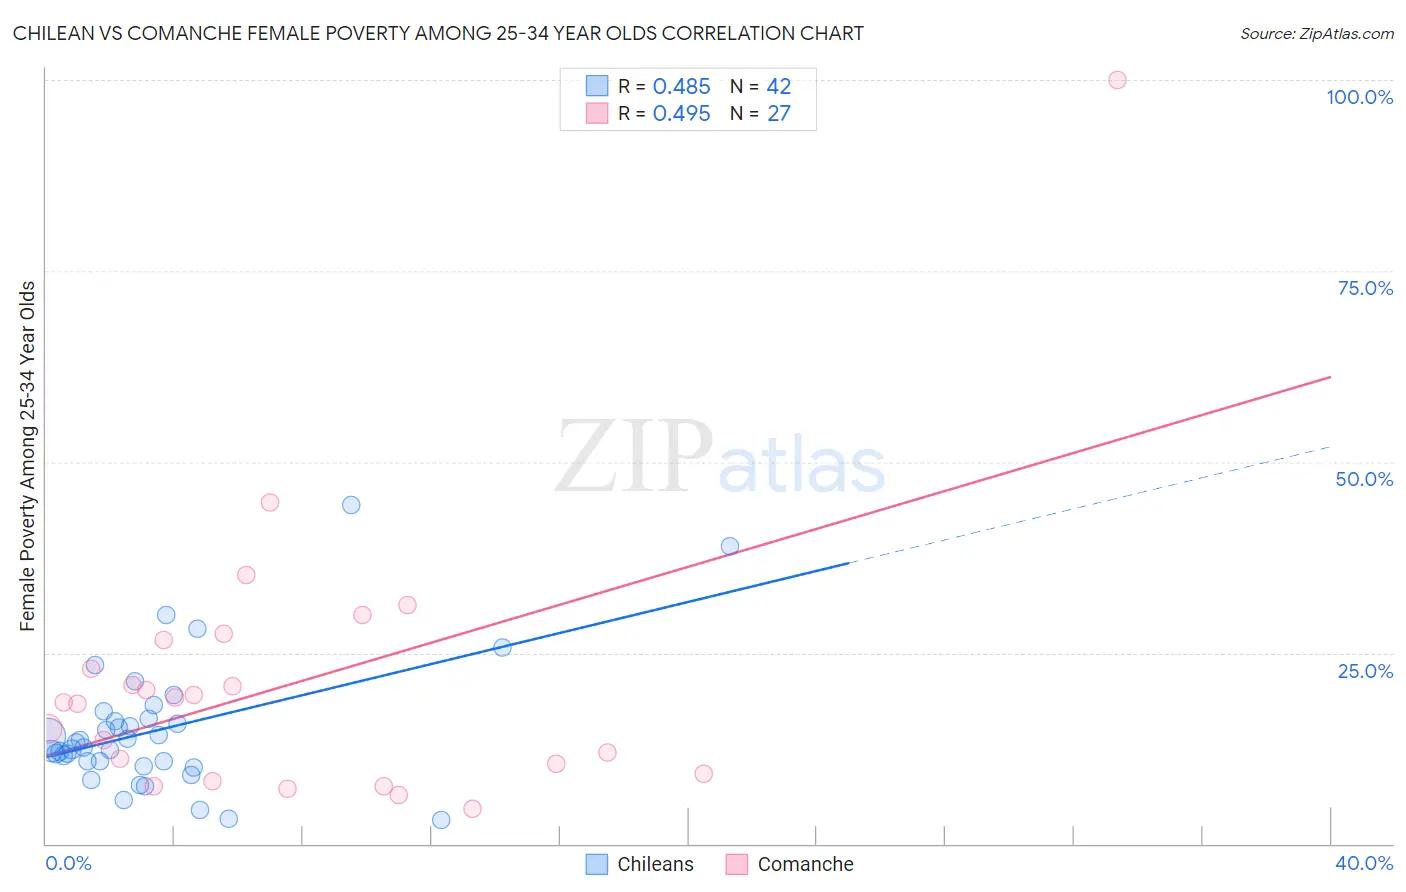 Chilean vs Comanche Female Poverty Among 25-34 Year Olds